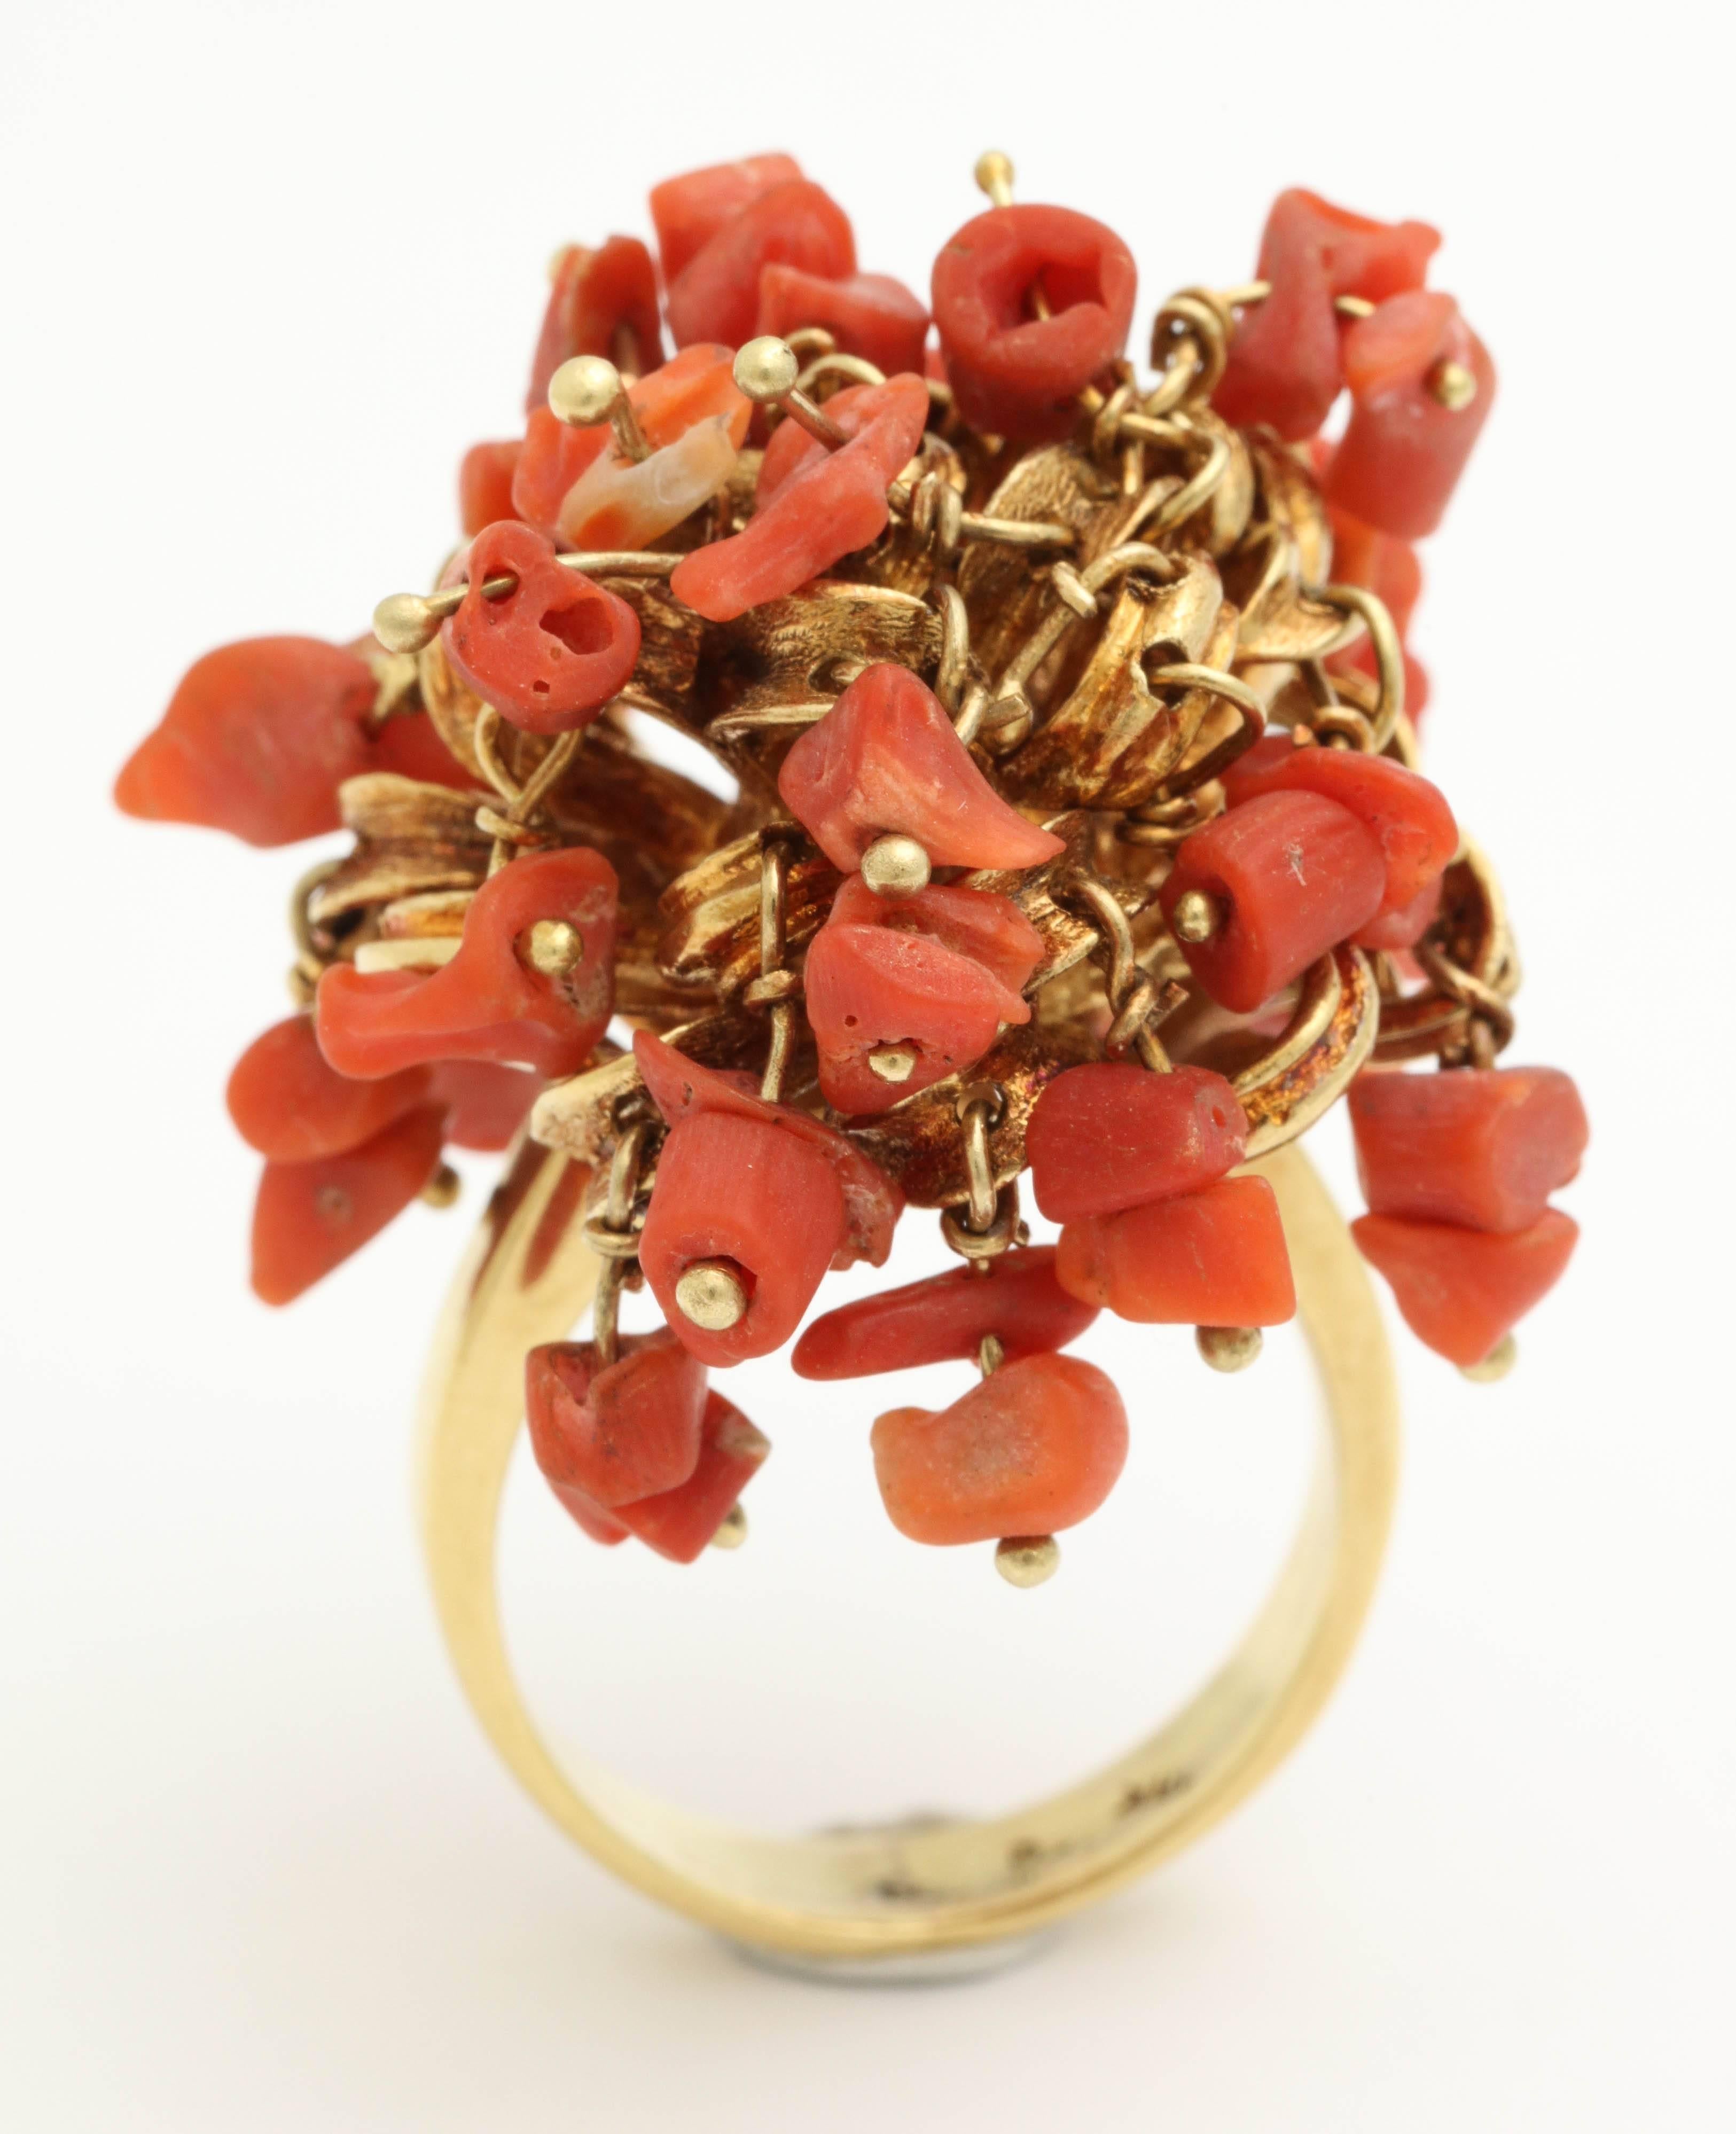 18kt Yellow Gold Shaky Coral Ring Consisting Of Multiple Moveable Tremblant Coral Pieces Attached By 18kt Yellow Gold Pelvits. Made In Italy In the 1960's.